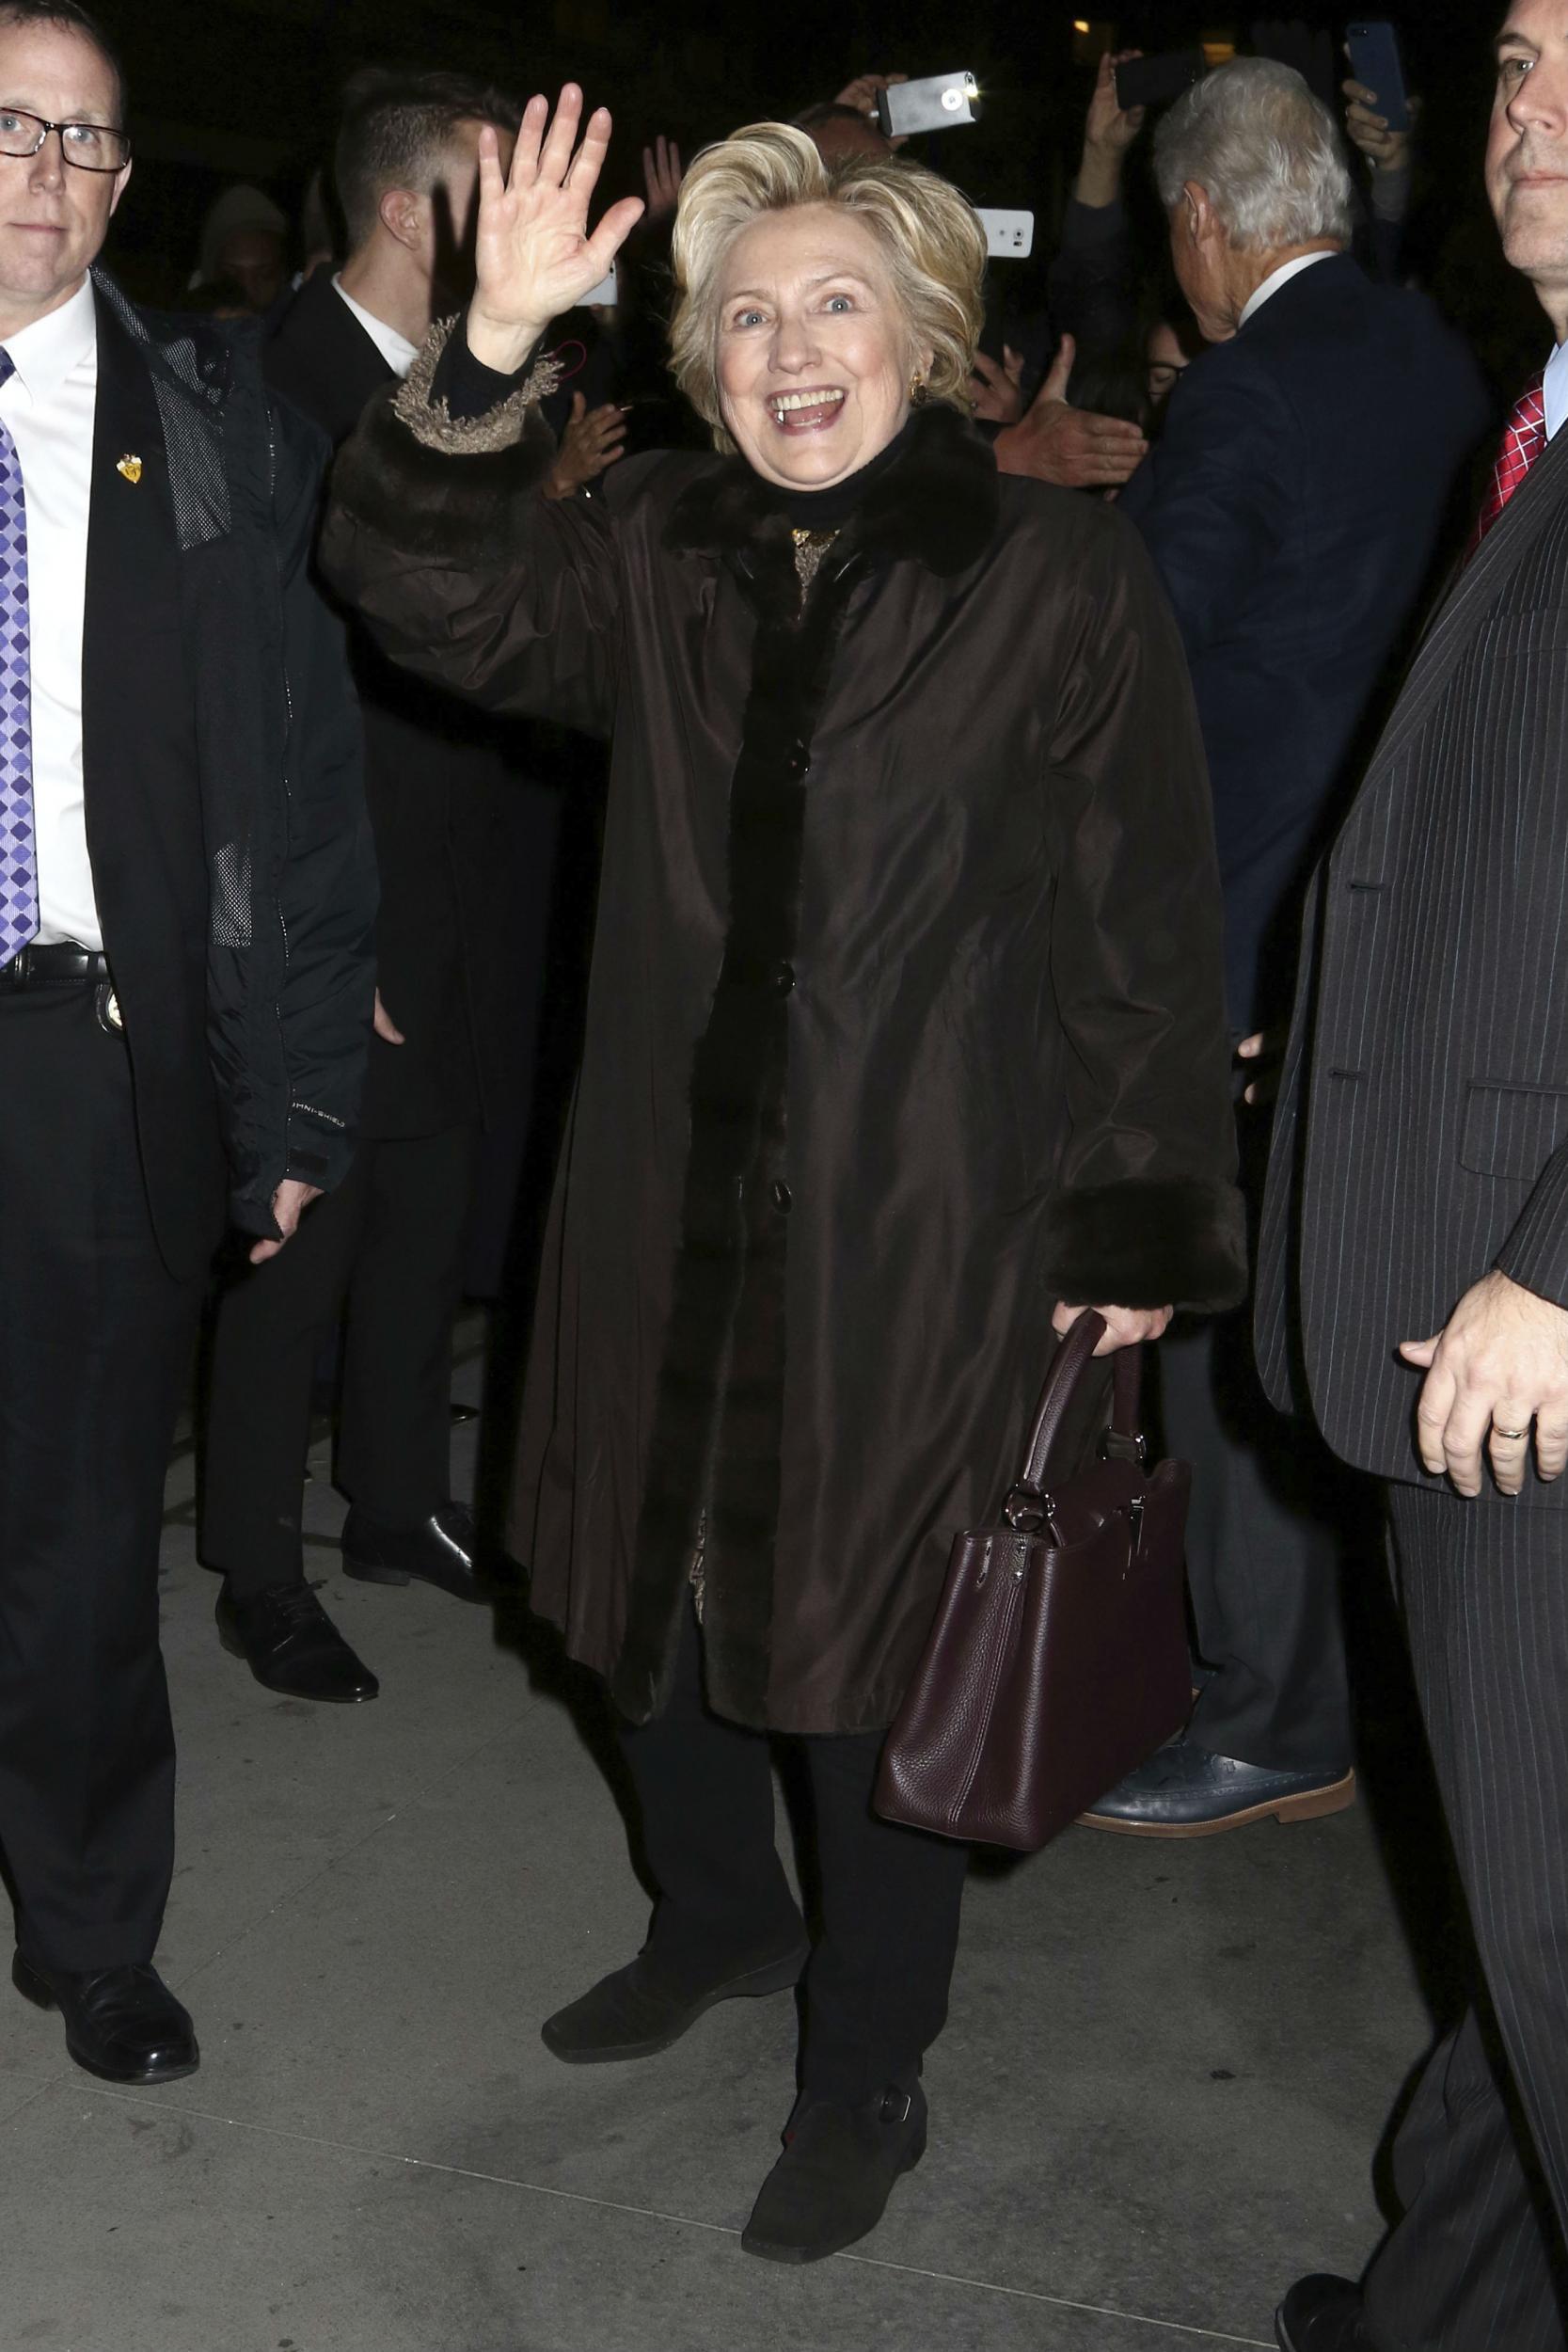 Hillary Clinton greeted by fans as she attends a Broadway opening this week